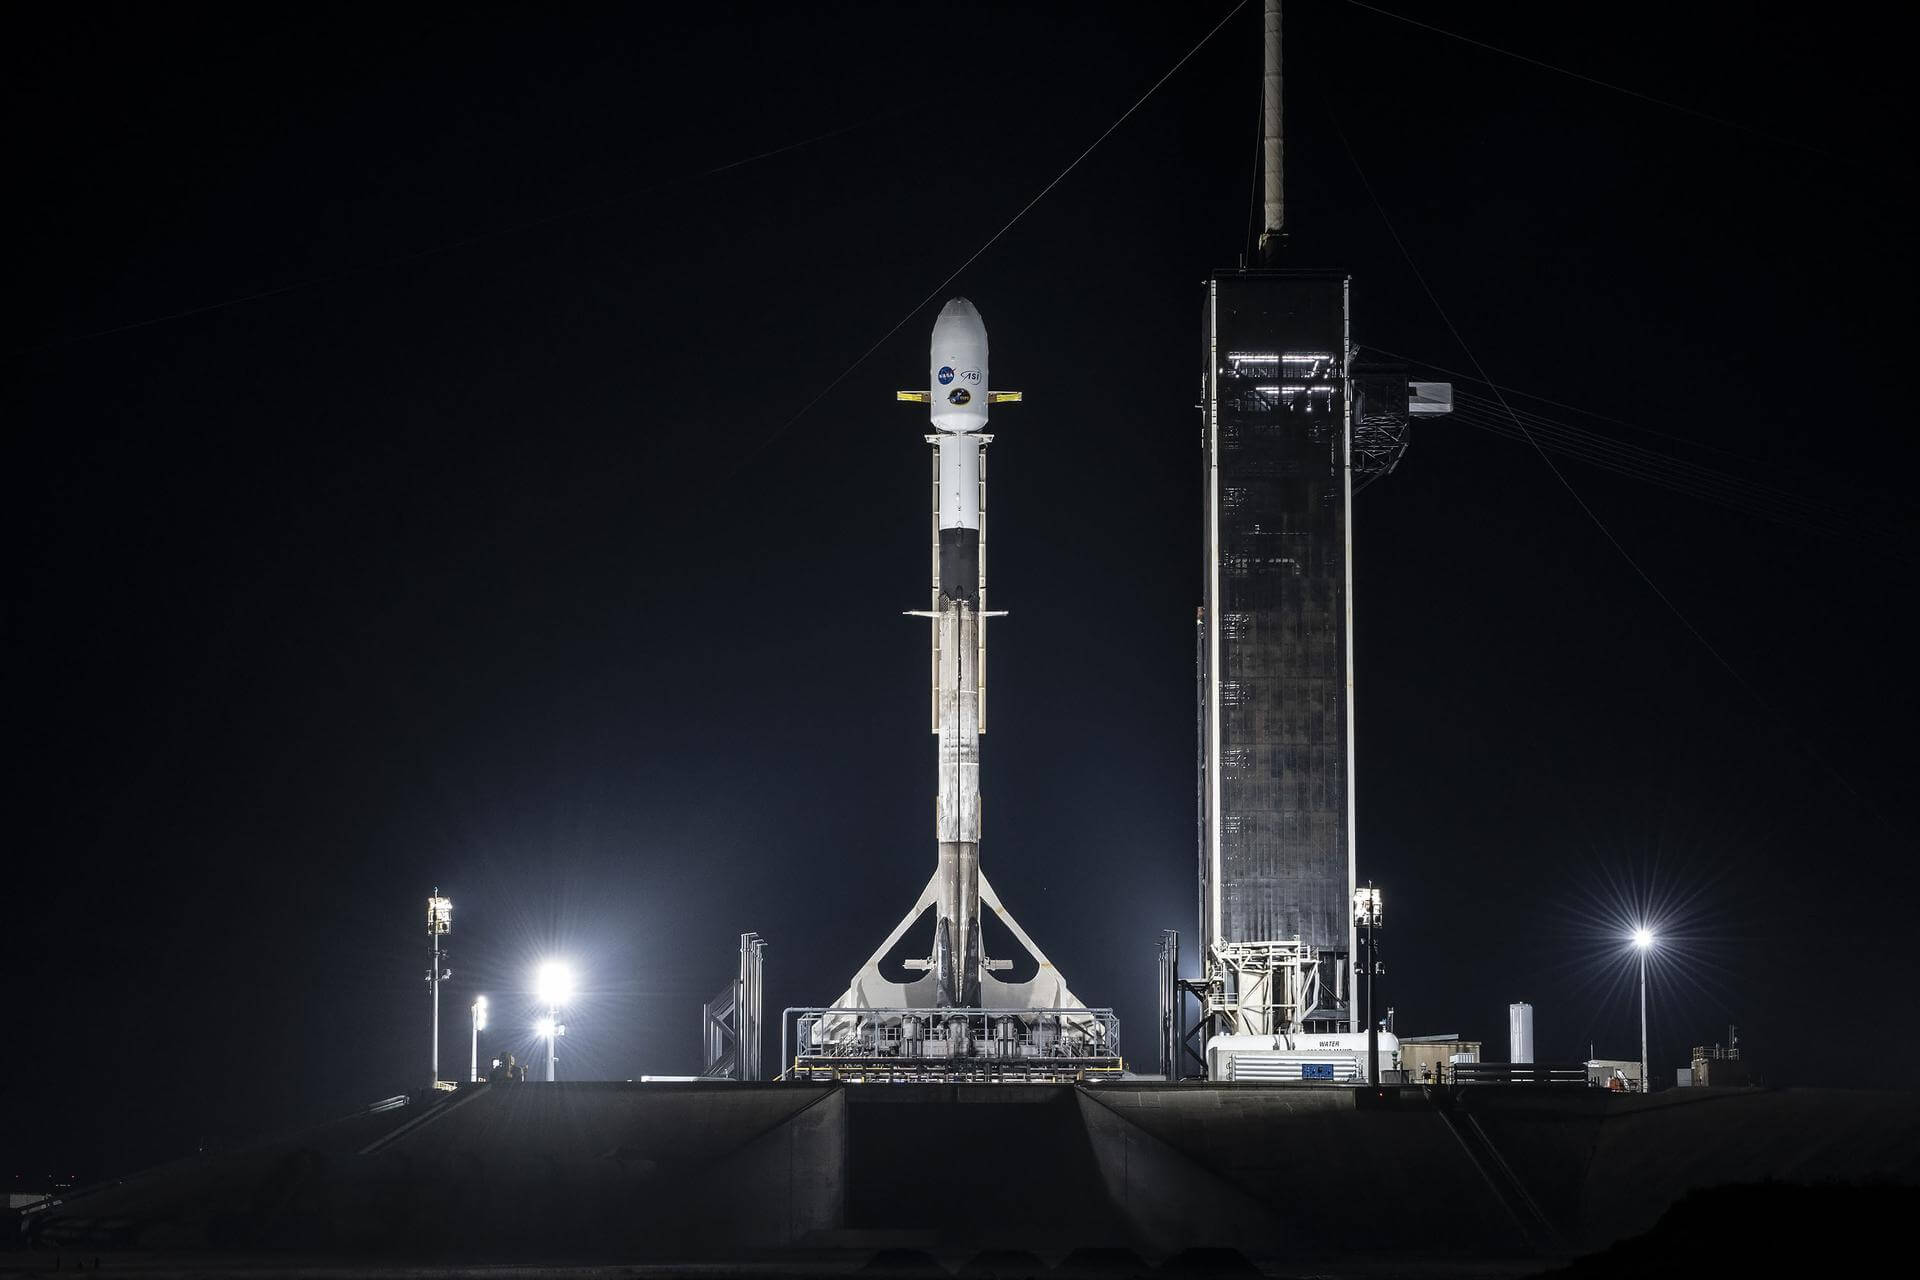 chance of falcon 9 launch today